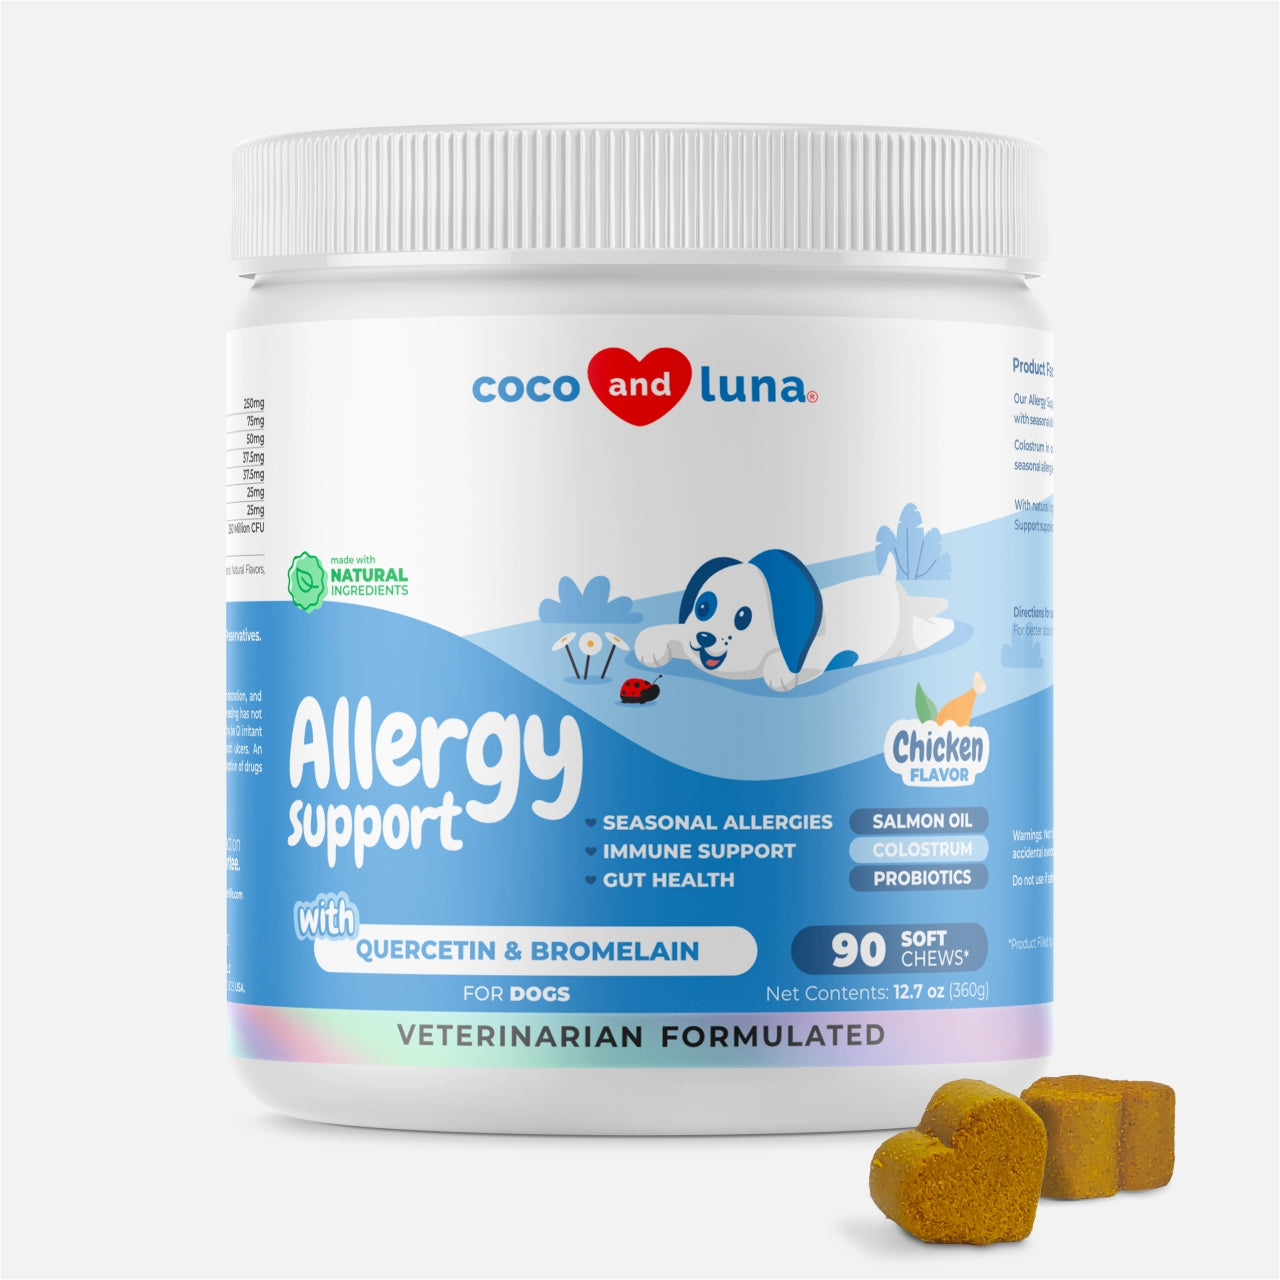 Allergy Support for Dogs - 90 Soft Chews - Coco and Luna